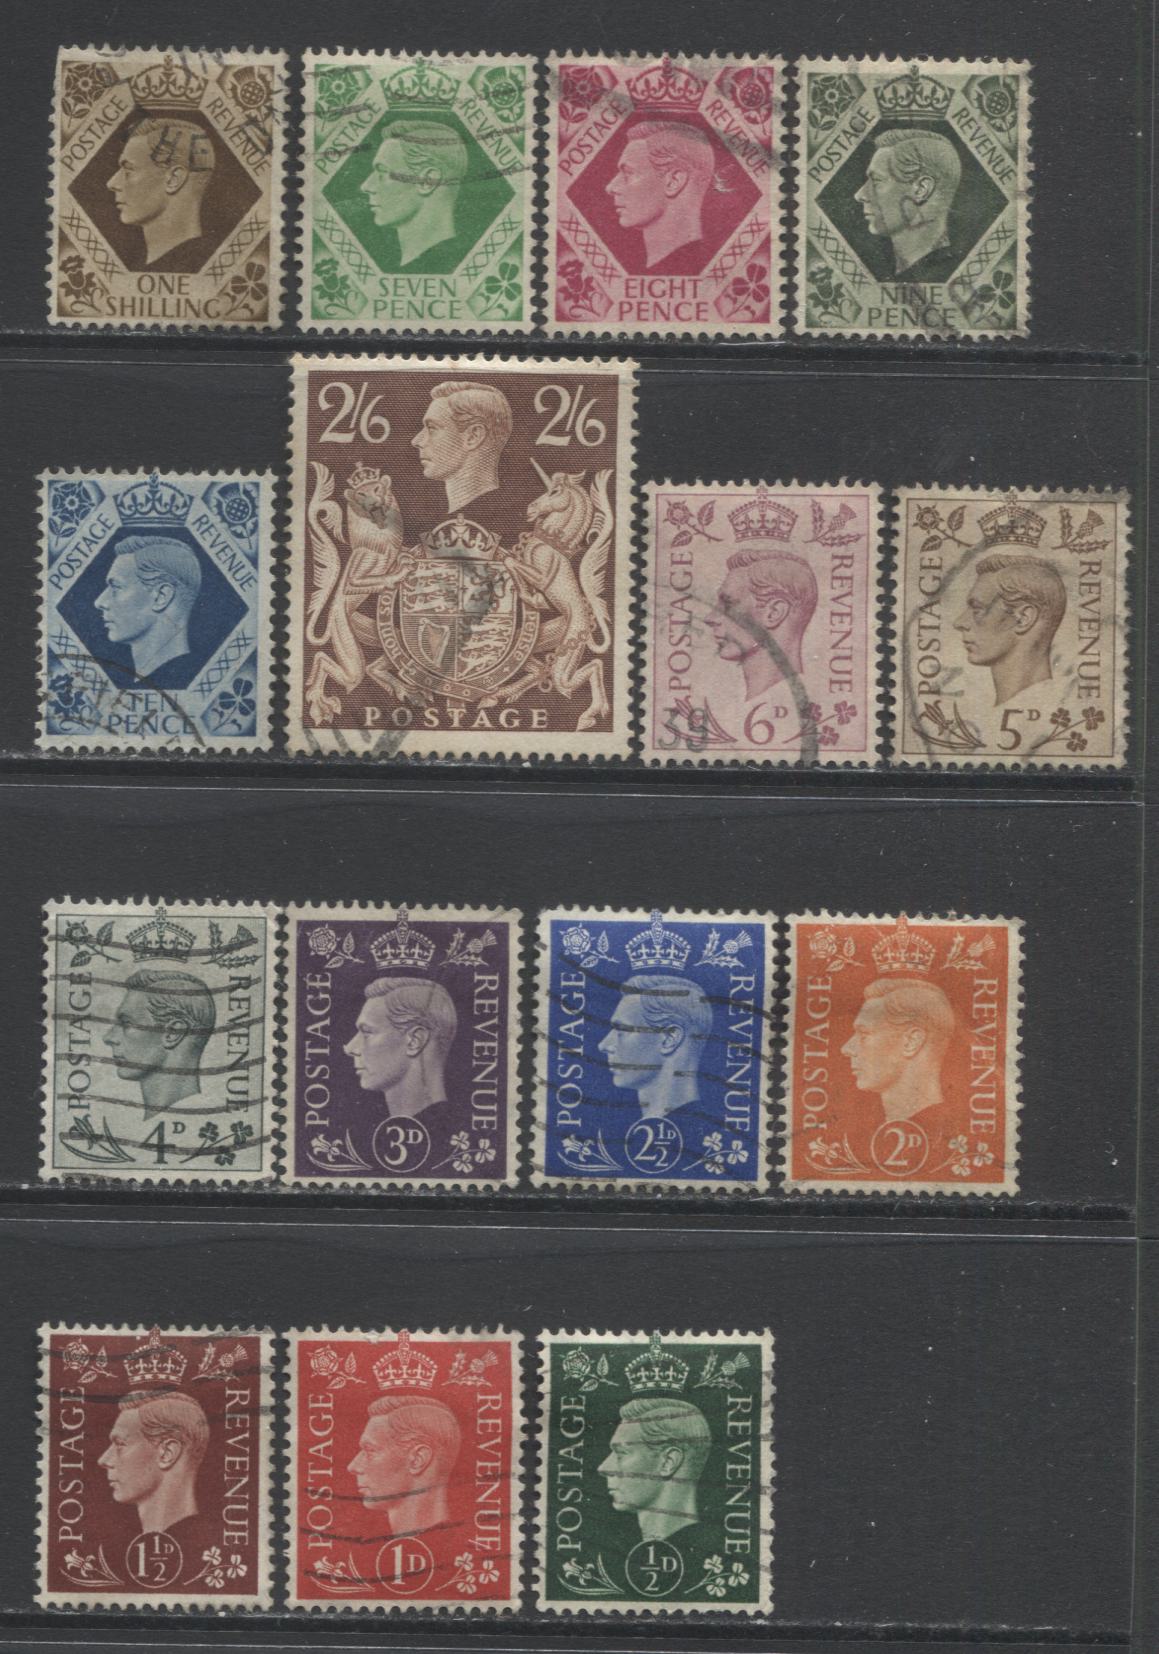 Lot 70 Great Britain SC#235-249 1937-1939 King George VI Definitives, A Fine Used Range Of Singles, 2017 Scott Cat. $16.4 USD, Click on Listing to See ALL Pictures